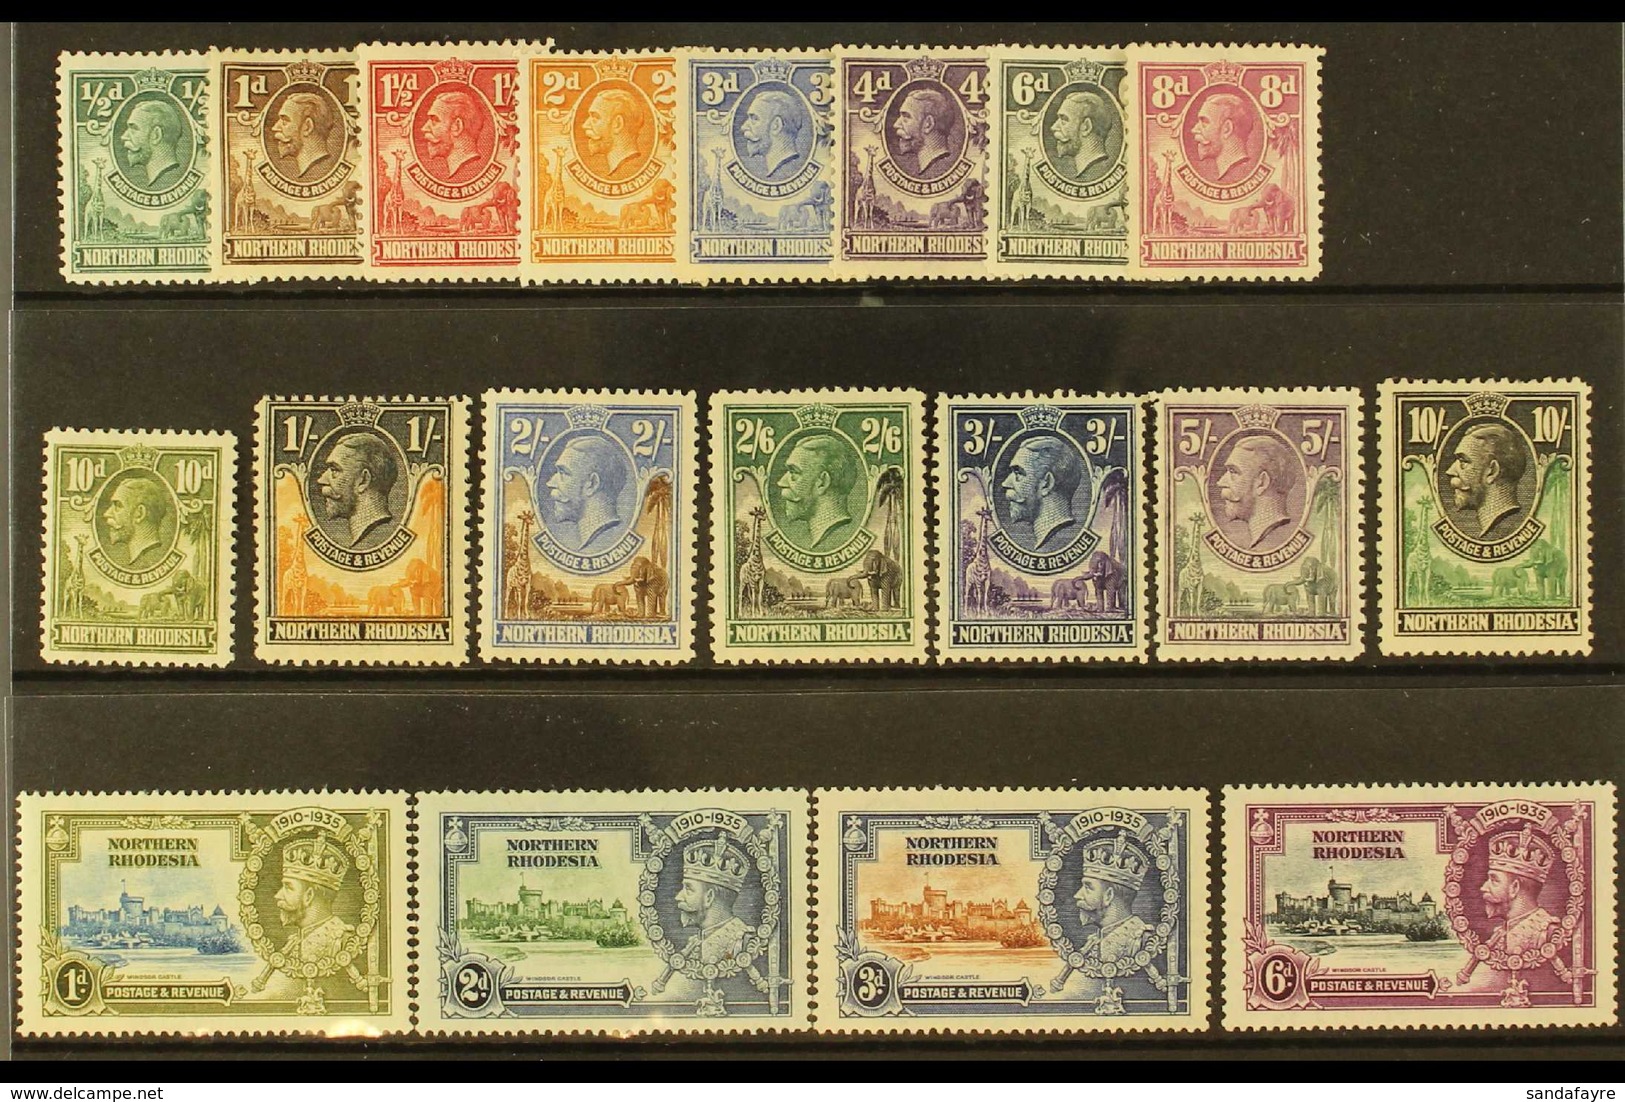 1925-36 KGV MINT COLLECTION Presented On A Stock Card That Includes 1925-29 Definitive Range With Most Values To 5s & 10 - Northern Rhodesia (...-1963)